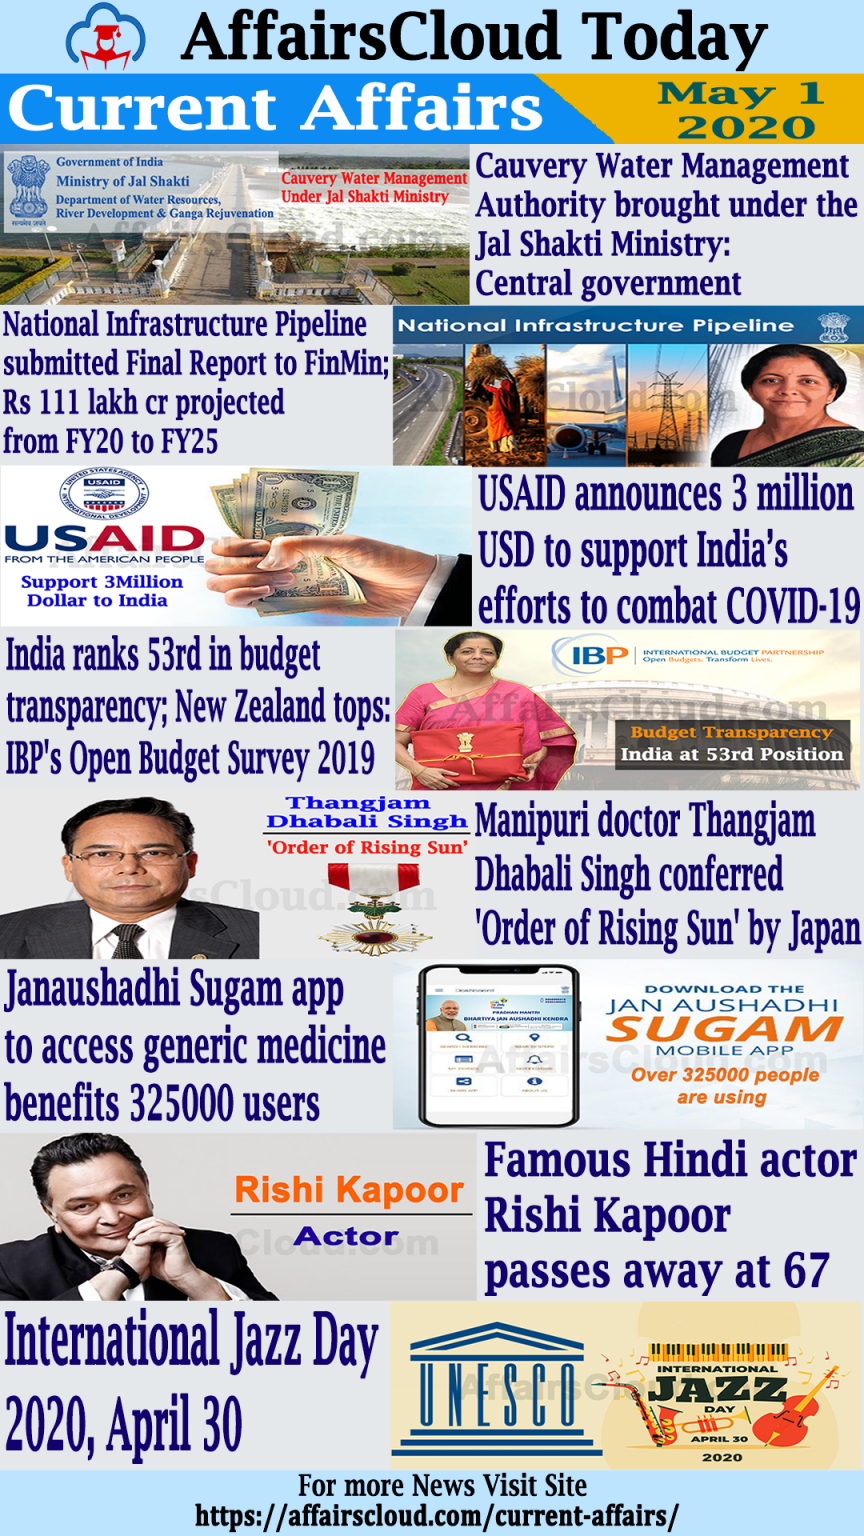 Top Current Affairs 1 May 2020 7508